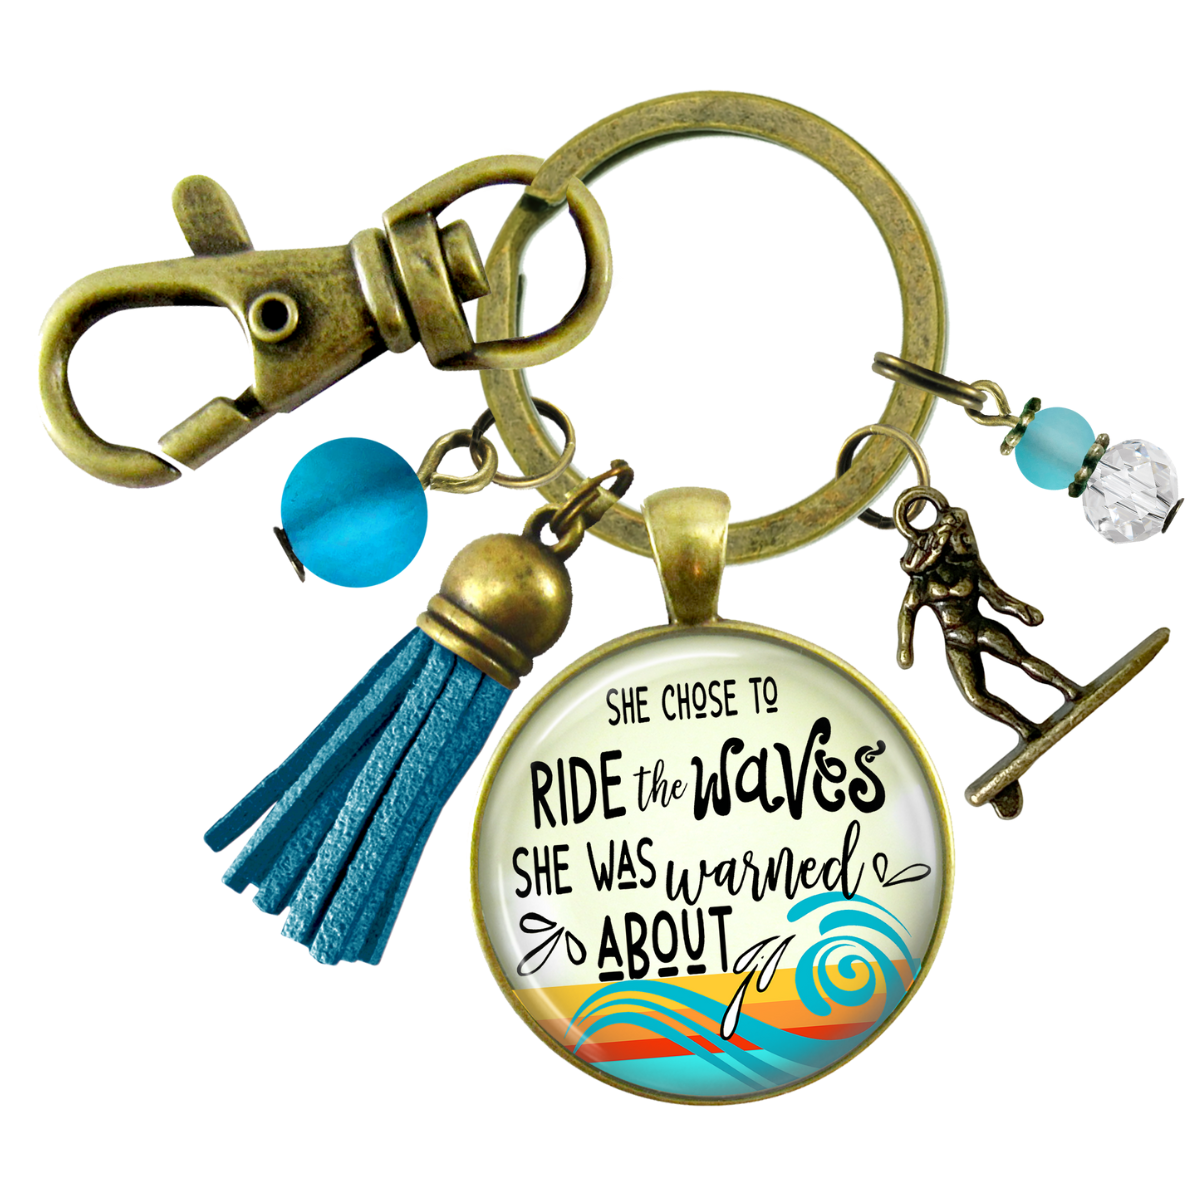 Surfer Girl Keychain She Rides The Waves They Warn Her About Motivation Life Mantra Tassel Charm  Keychain - Women - Gutsy Goodness Handmade Jewelry